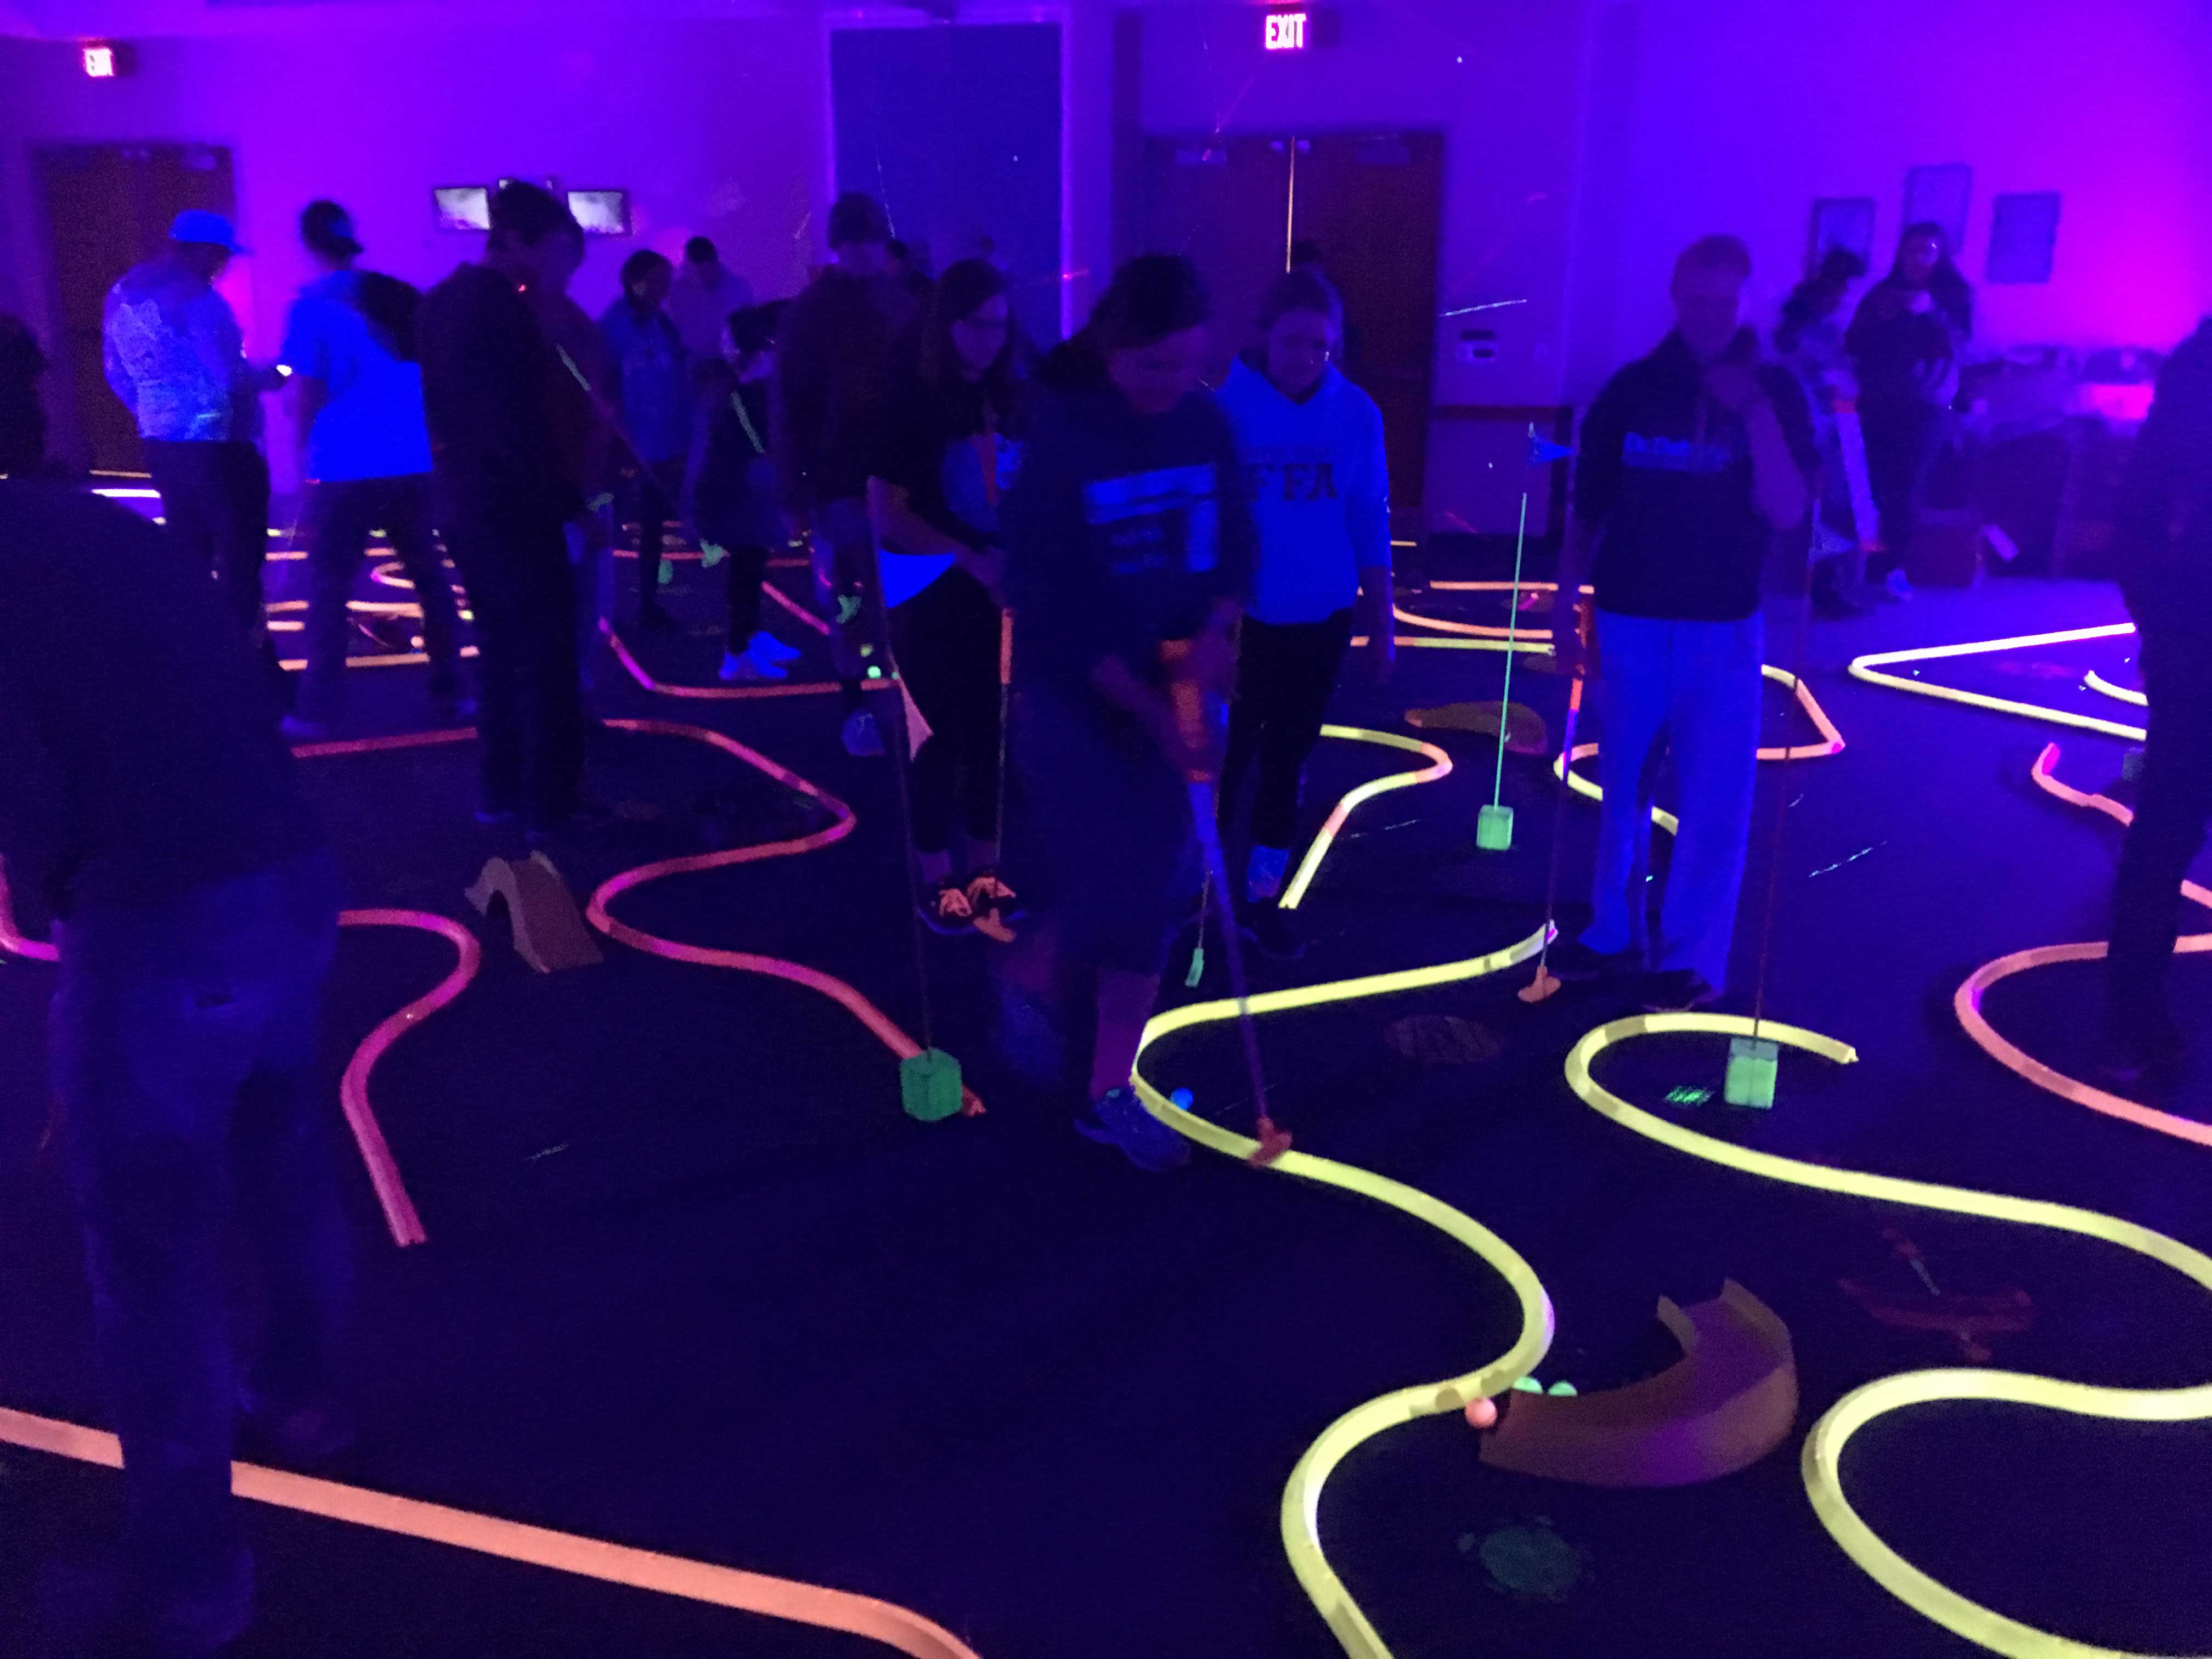 Glow golf was a popular draw for student to participate in Union Take Over.